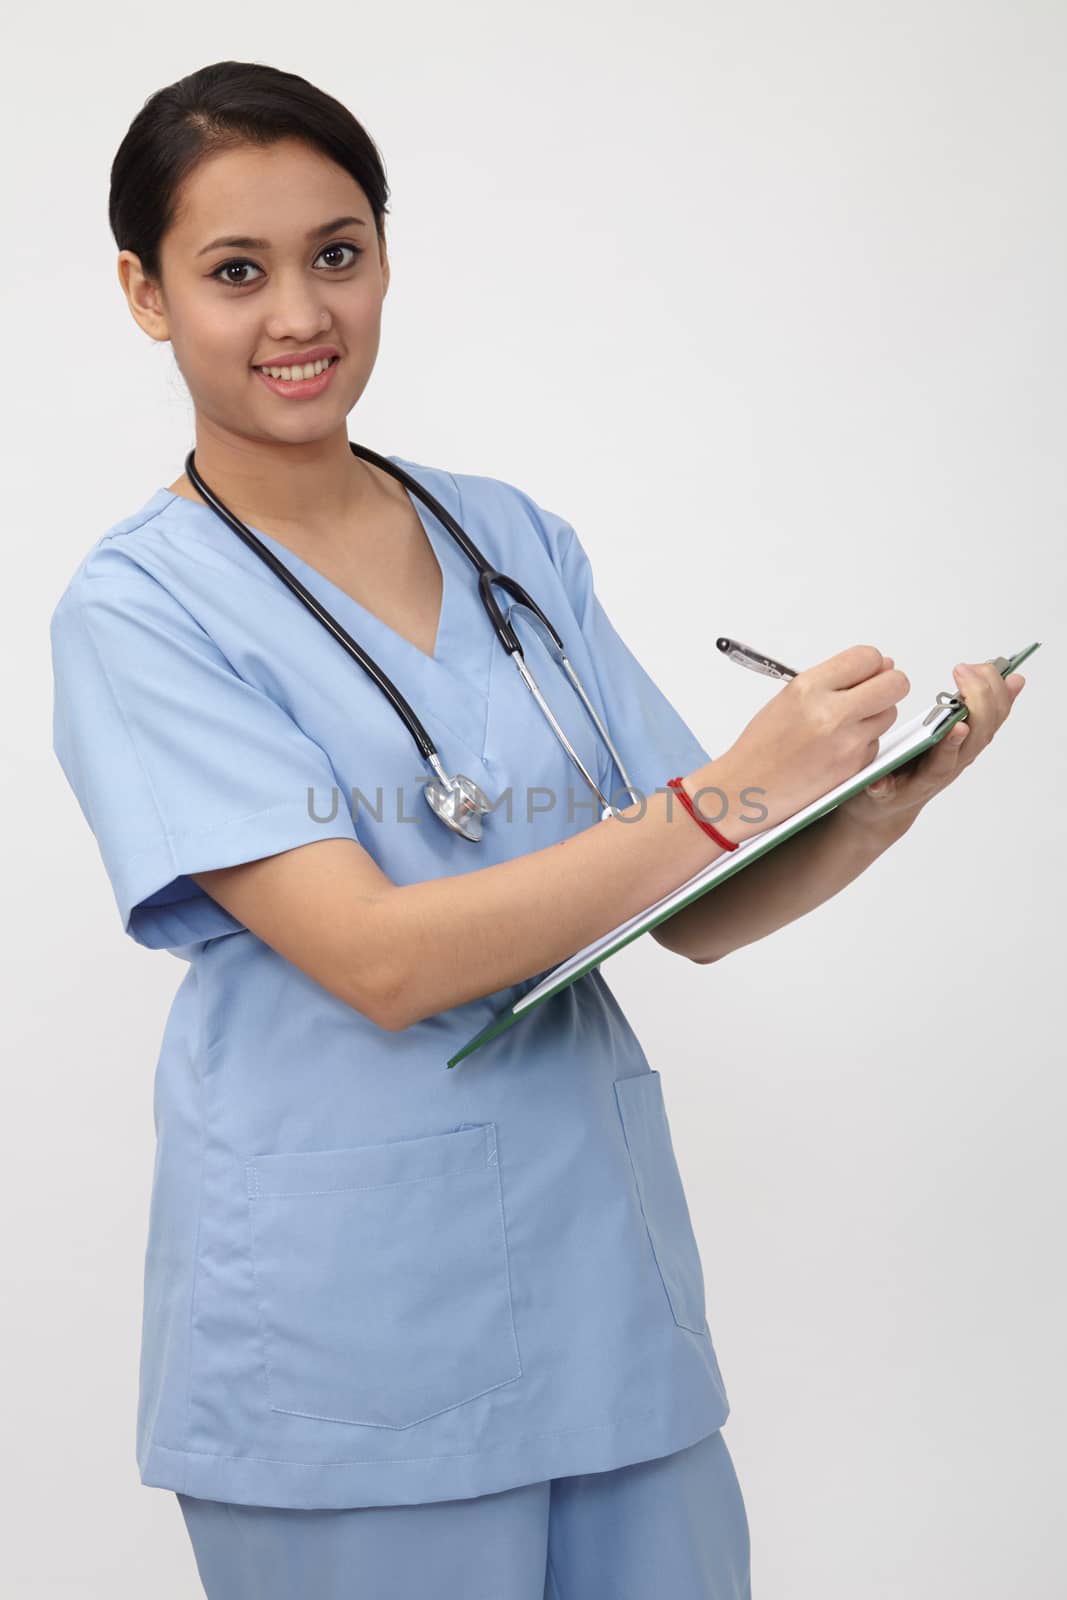 nurse writng on the clipboard that she is holding